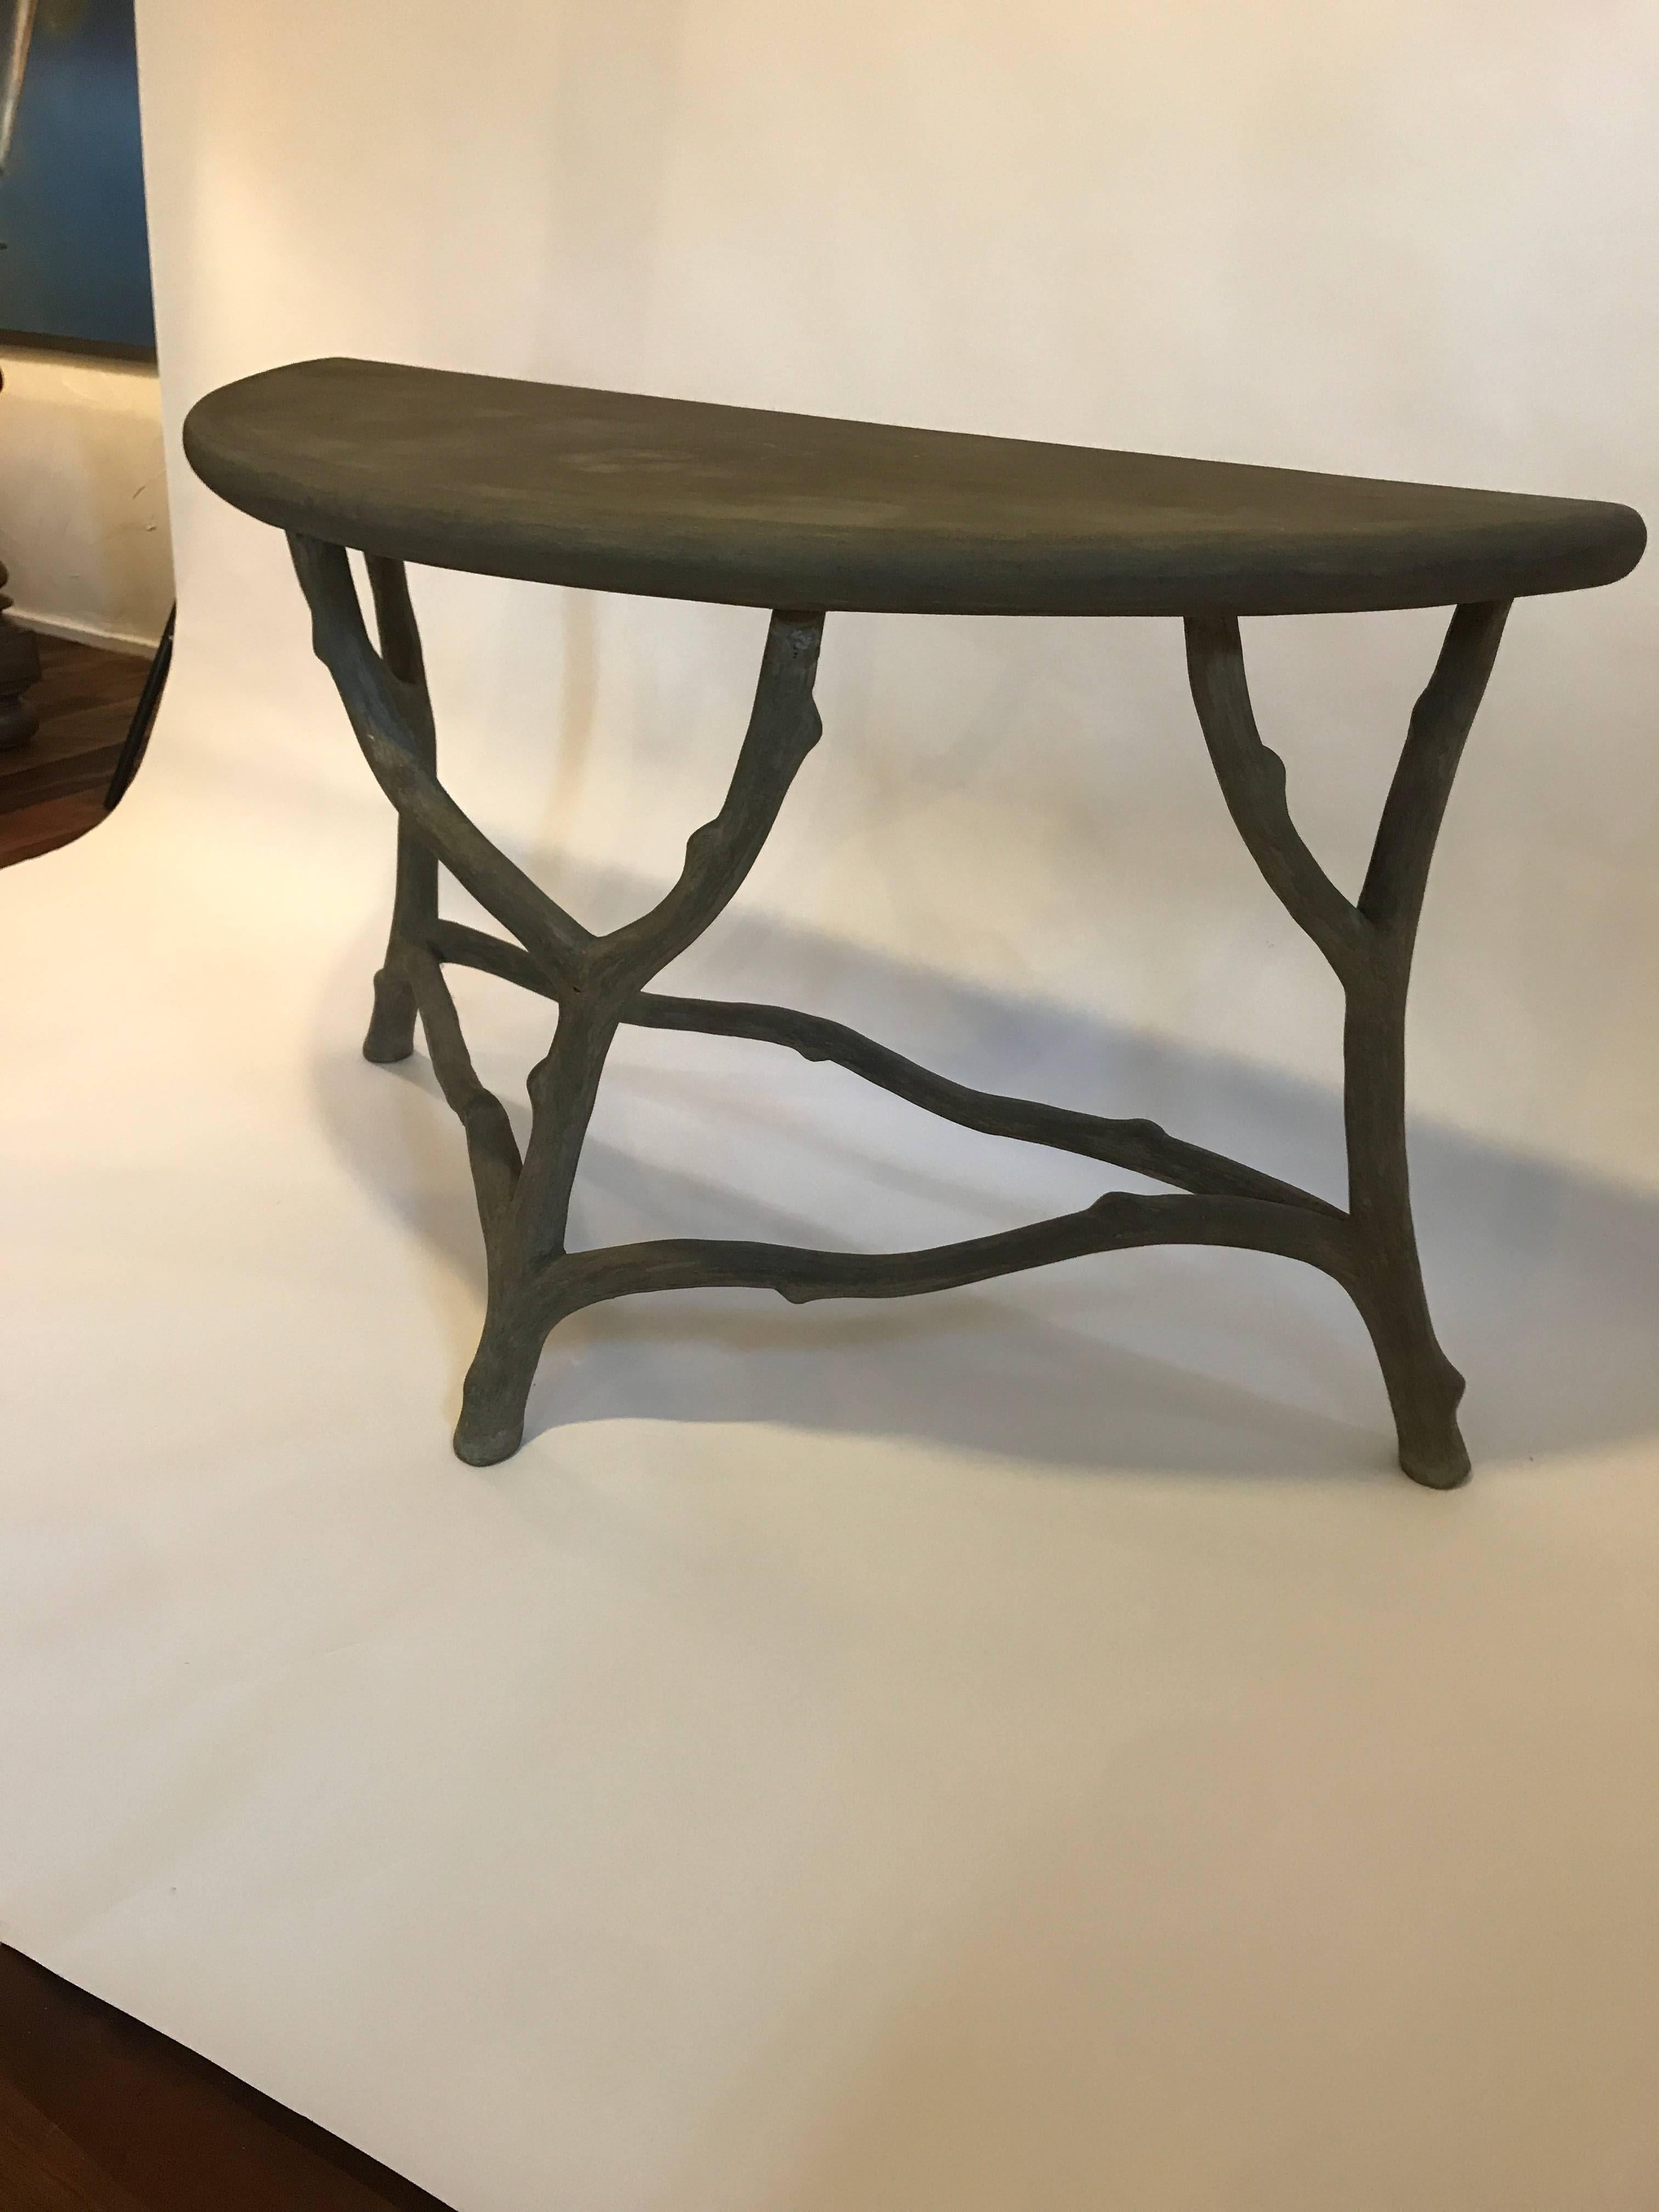 Faux Bois concrete demilune console table
Concrete over metal mesh frame
The first photo reads a bit dark, it is a grey color.
weight: 75 lbs

Top has some water marks and naturally occurring discoloration. Some hairline cracks in the concrete